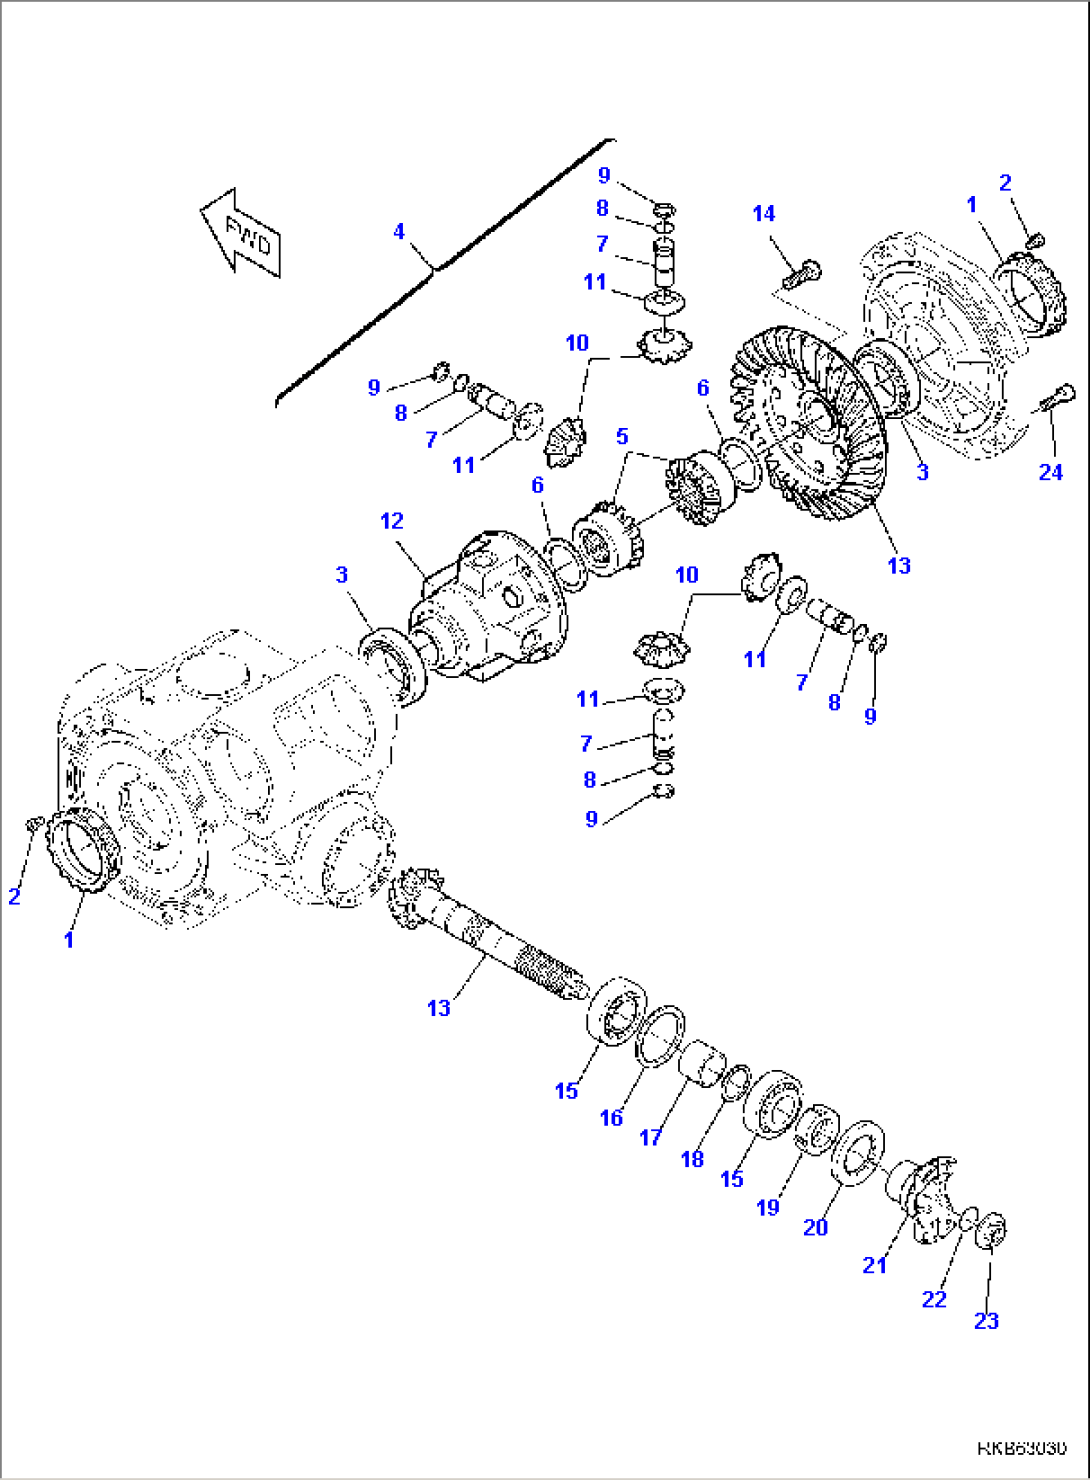 FRONT AXLE (2/7)